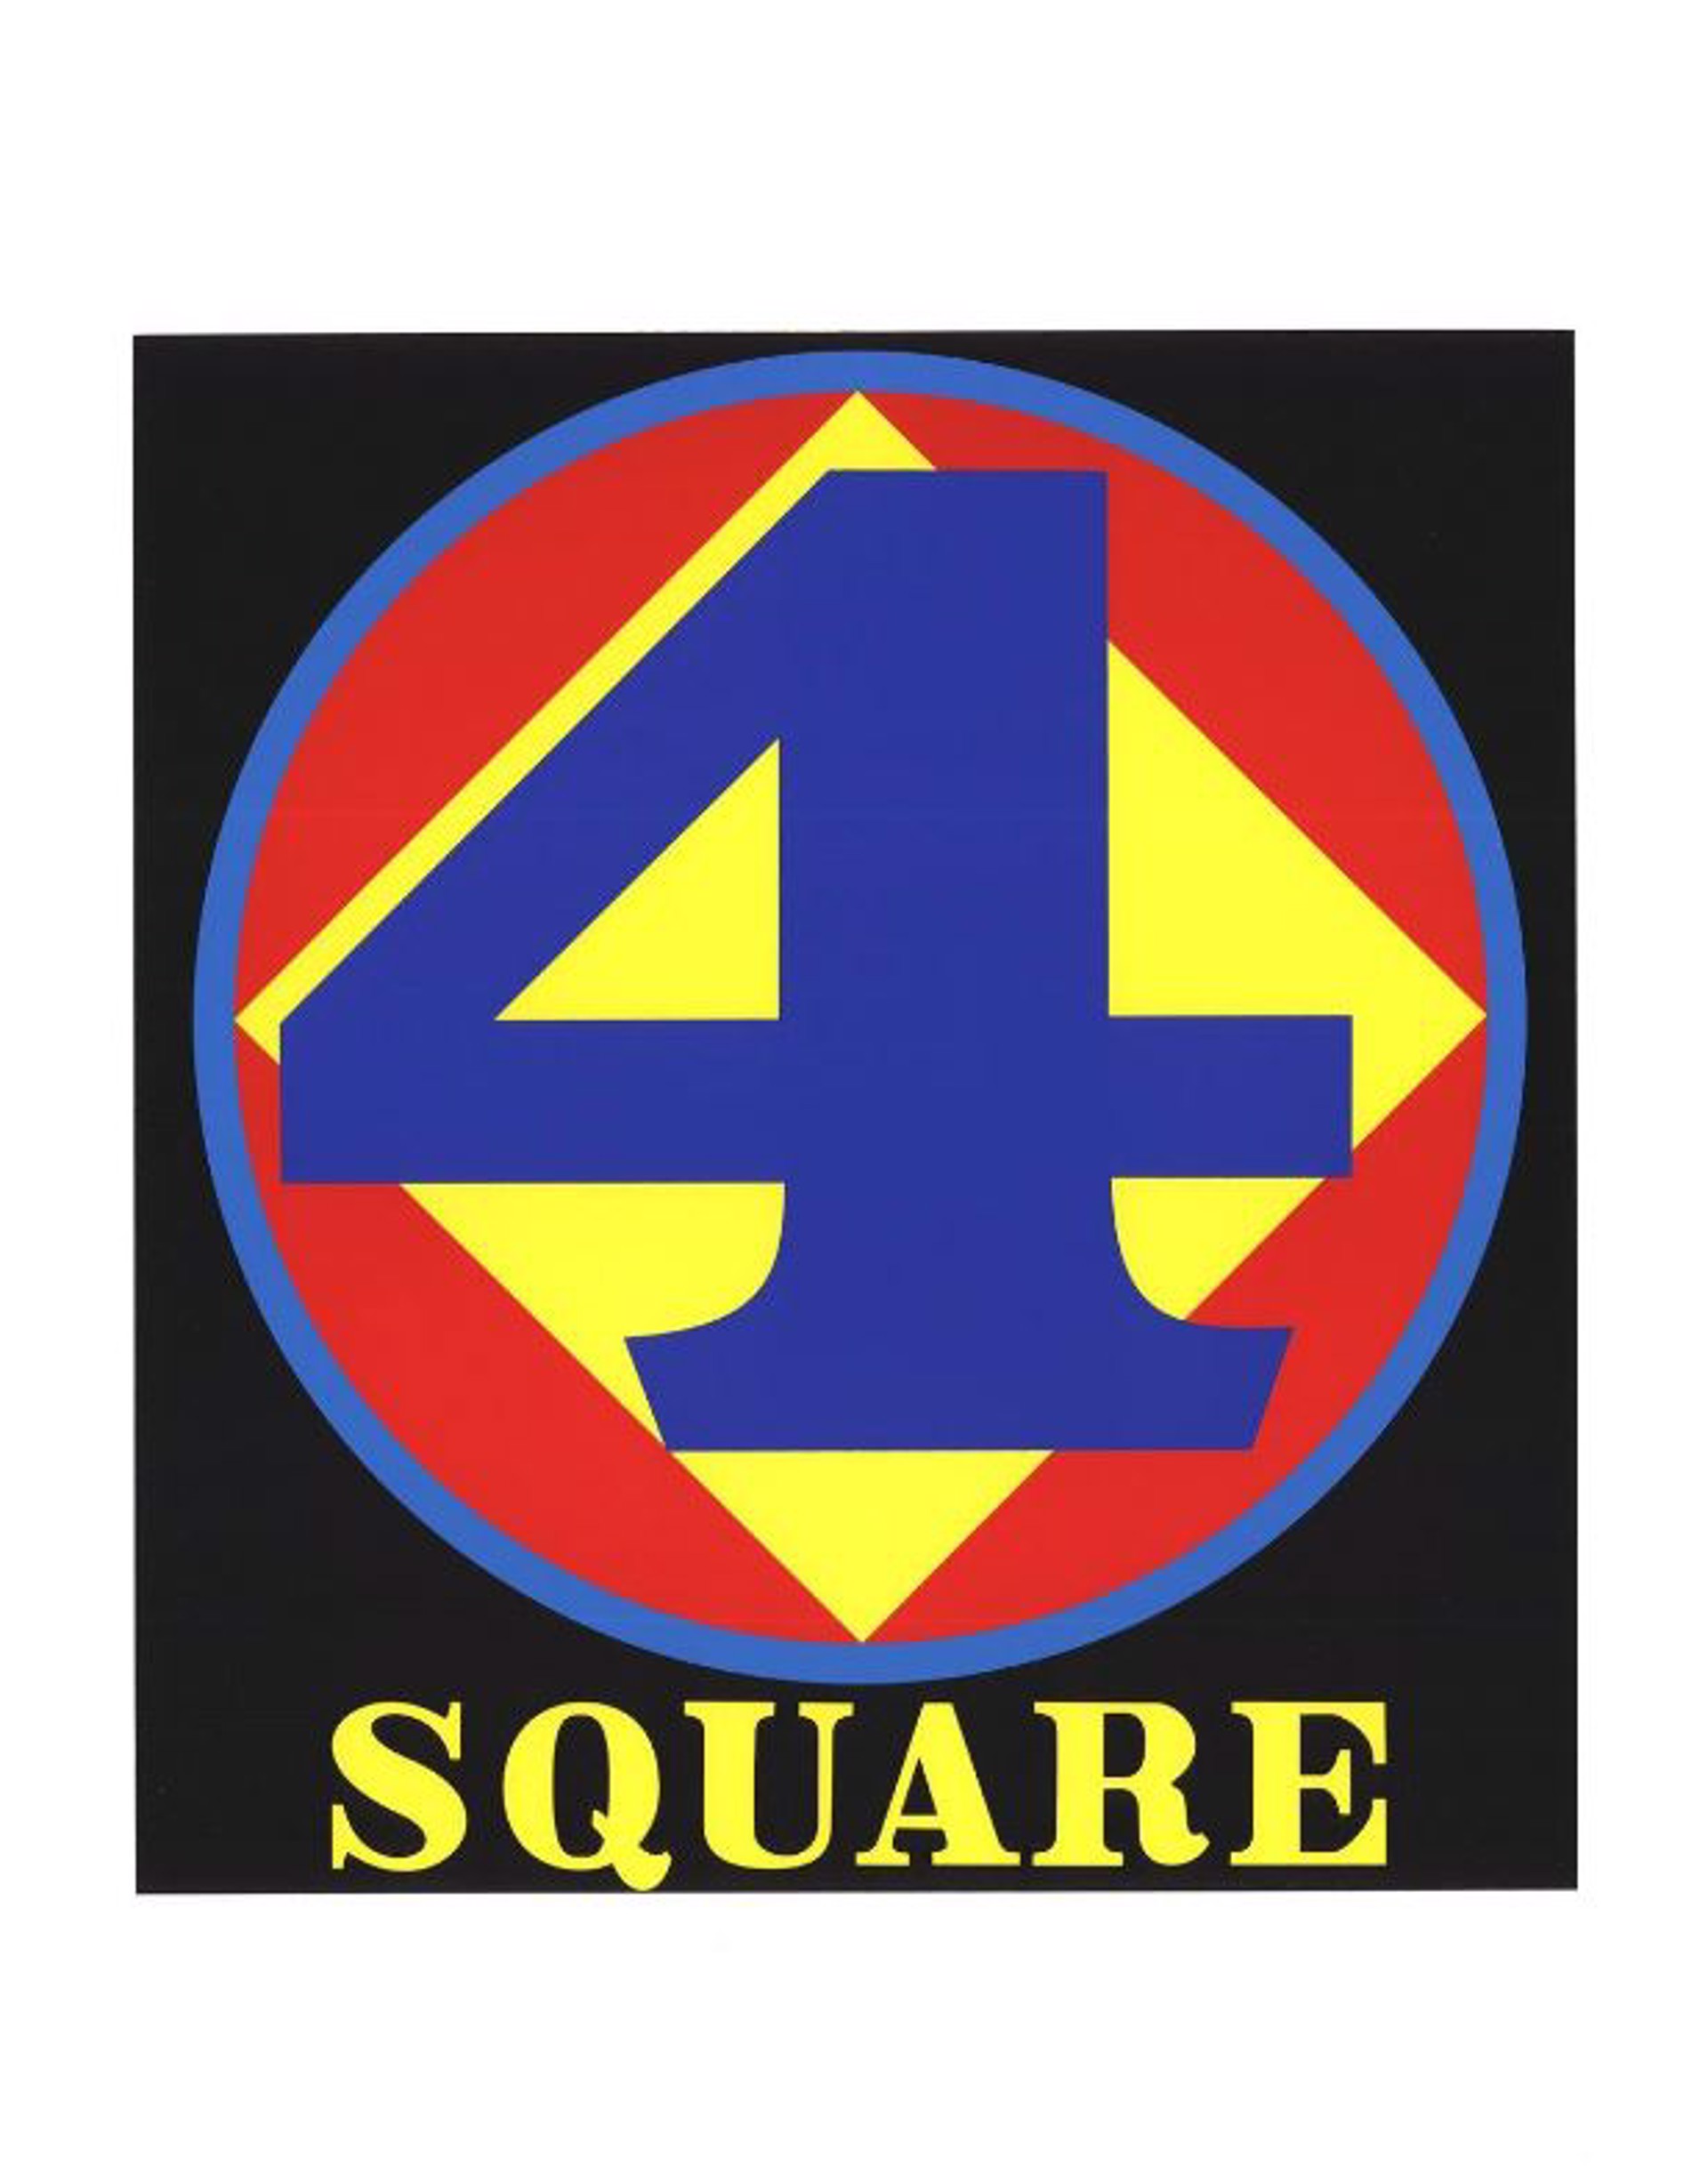 4 Square from The American Dream Portfolio by Robert Indiana